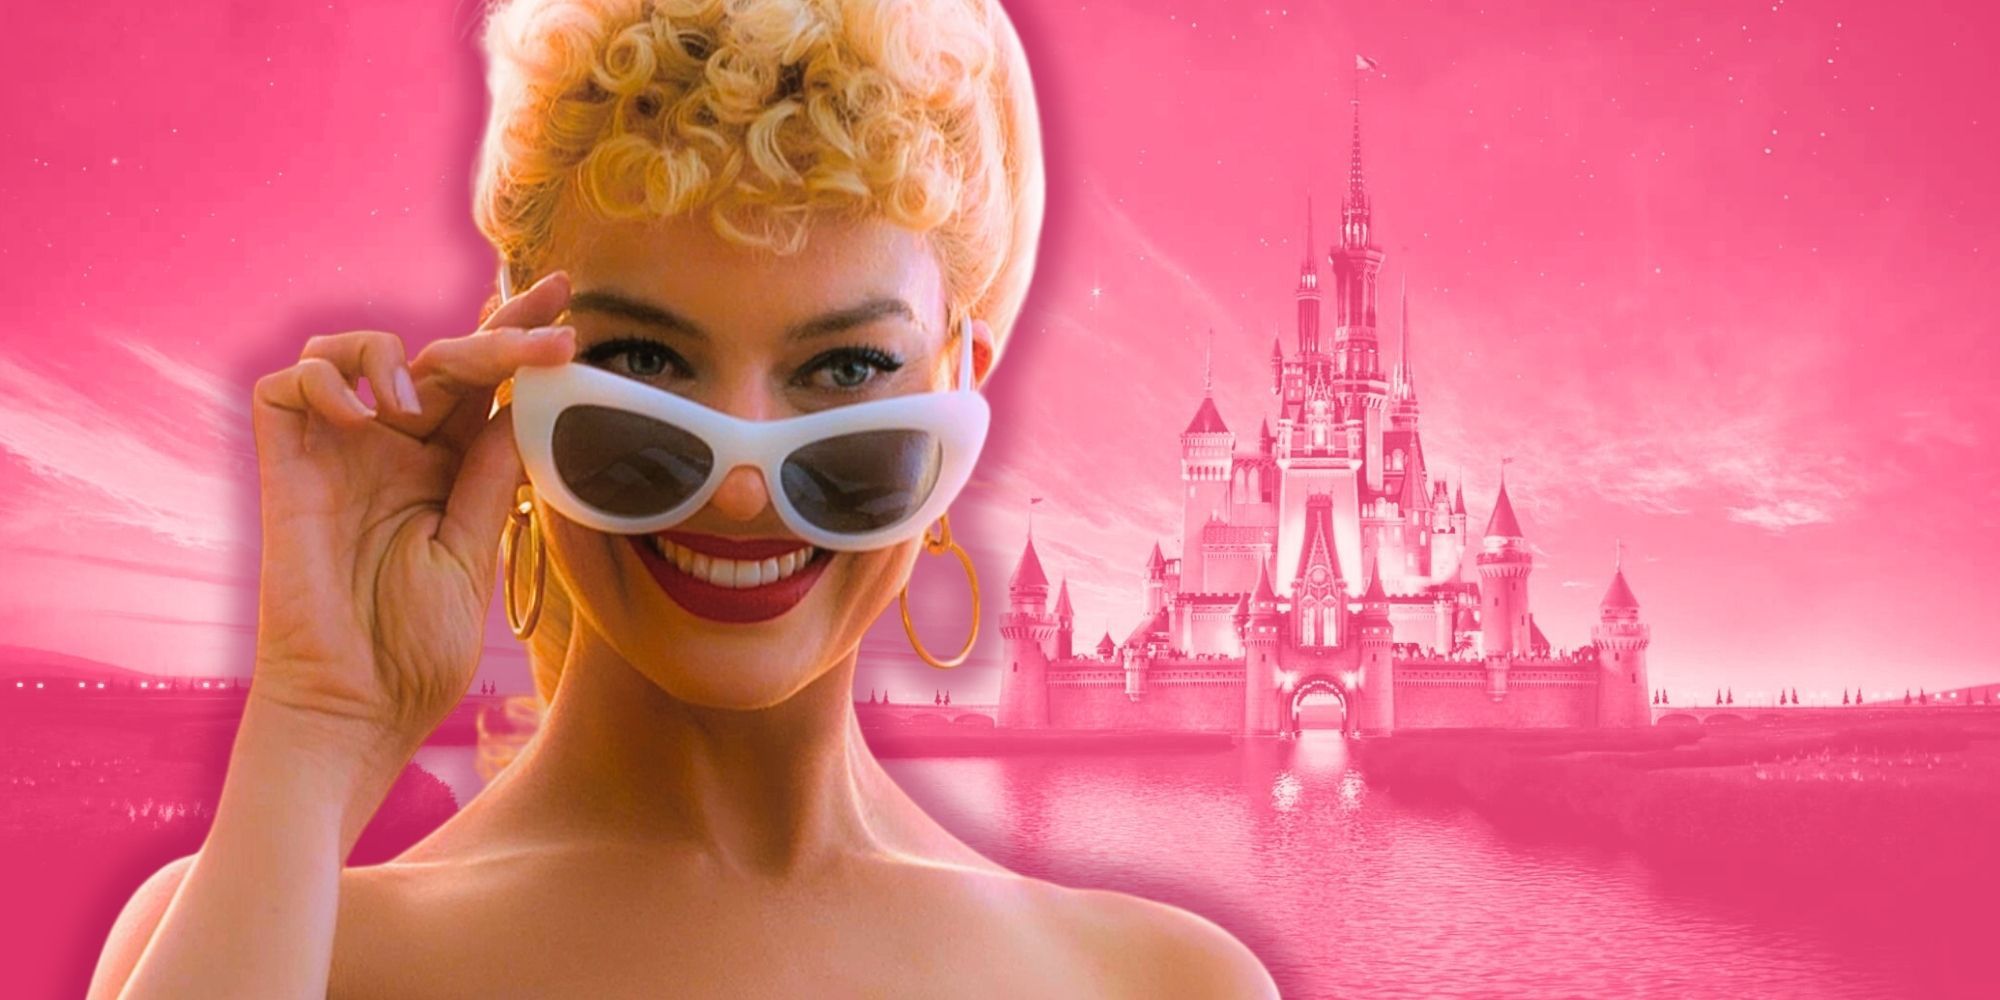 Margot Robbie as Barbie in front of the Disney castle